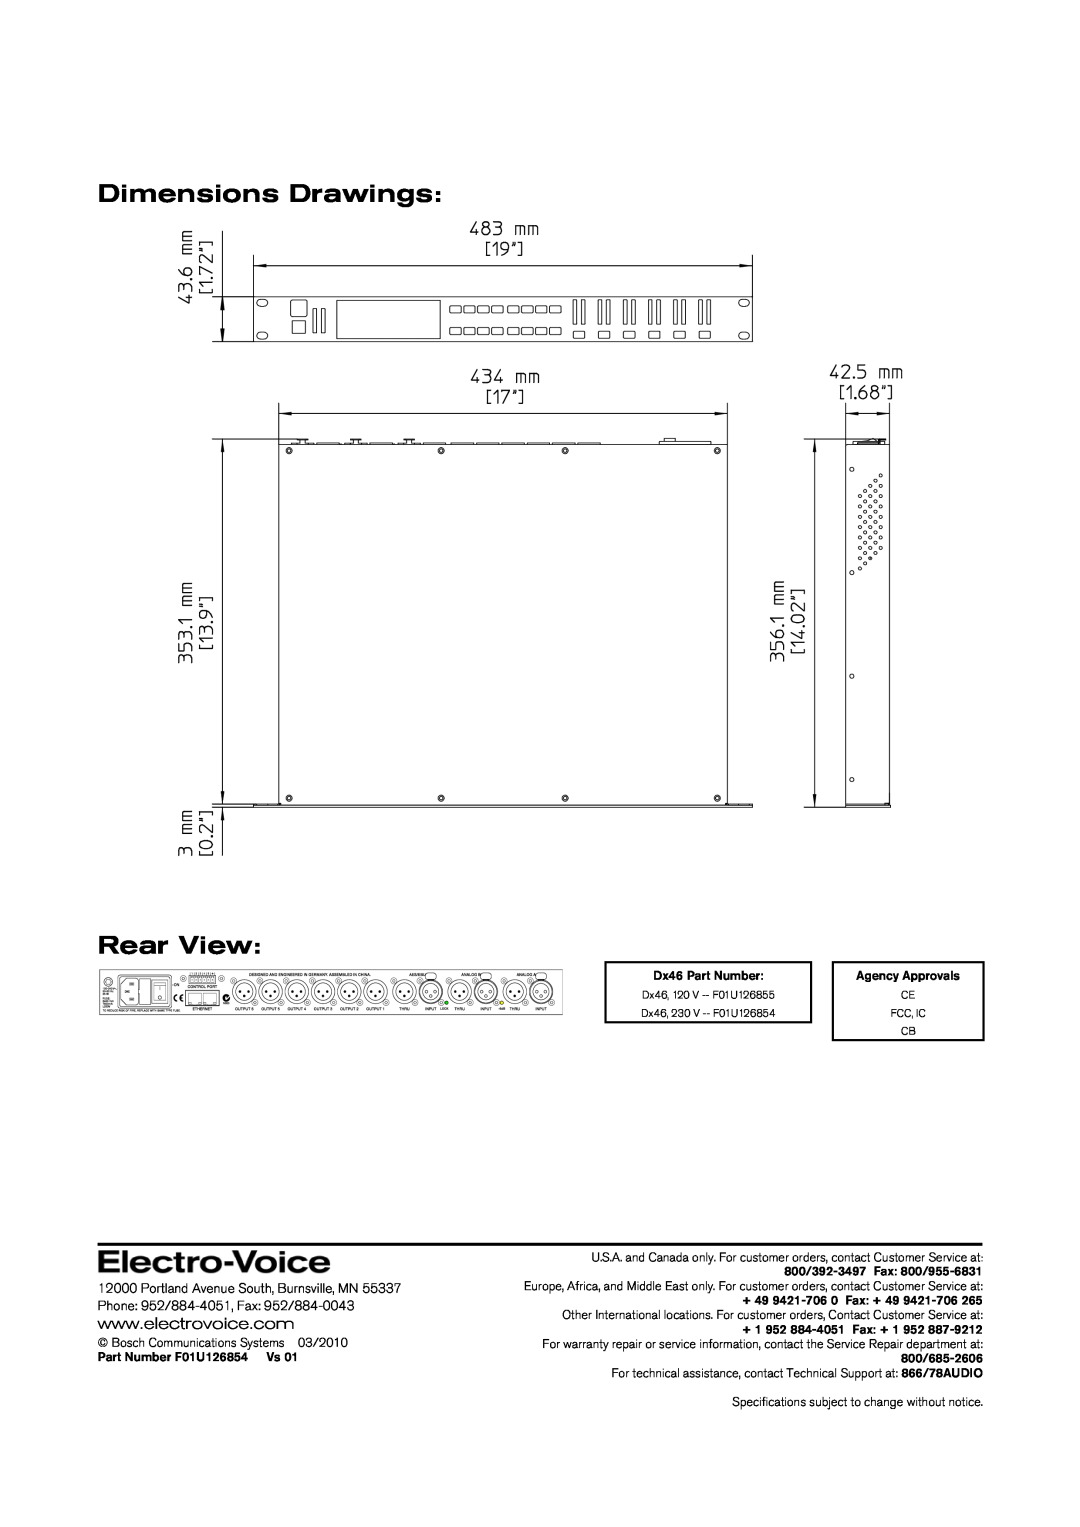 Electro-Voice DX46 technical specifications Dimensions Drawings Rear View, Portland Avenue South, Burnsville, MN 